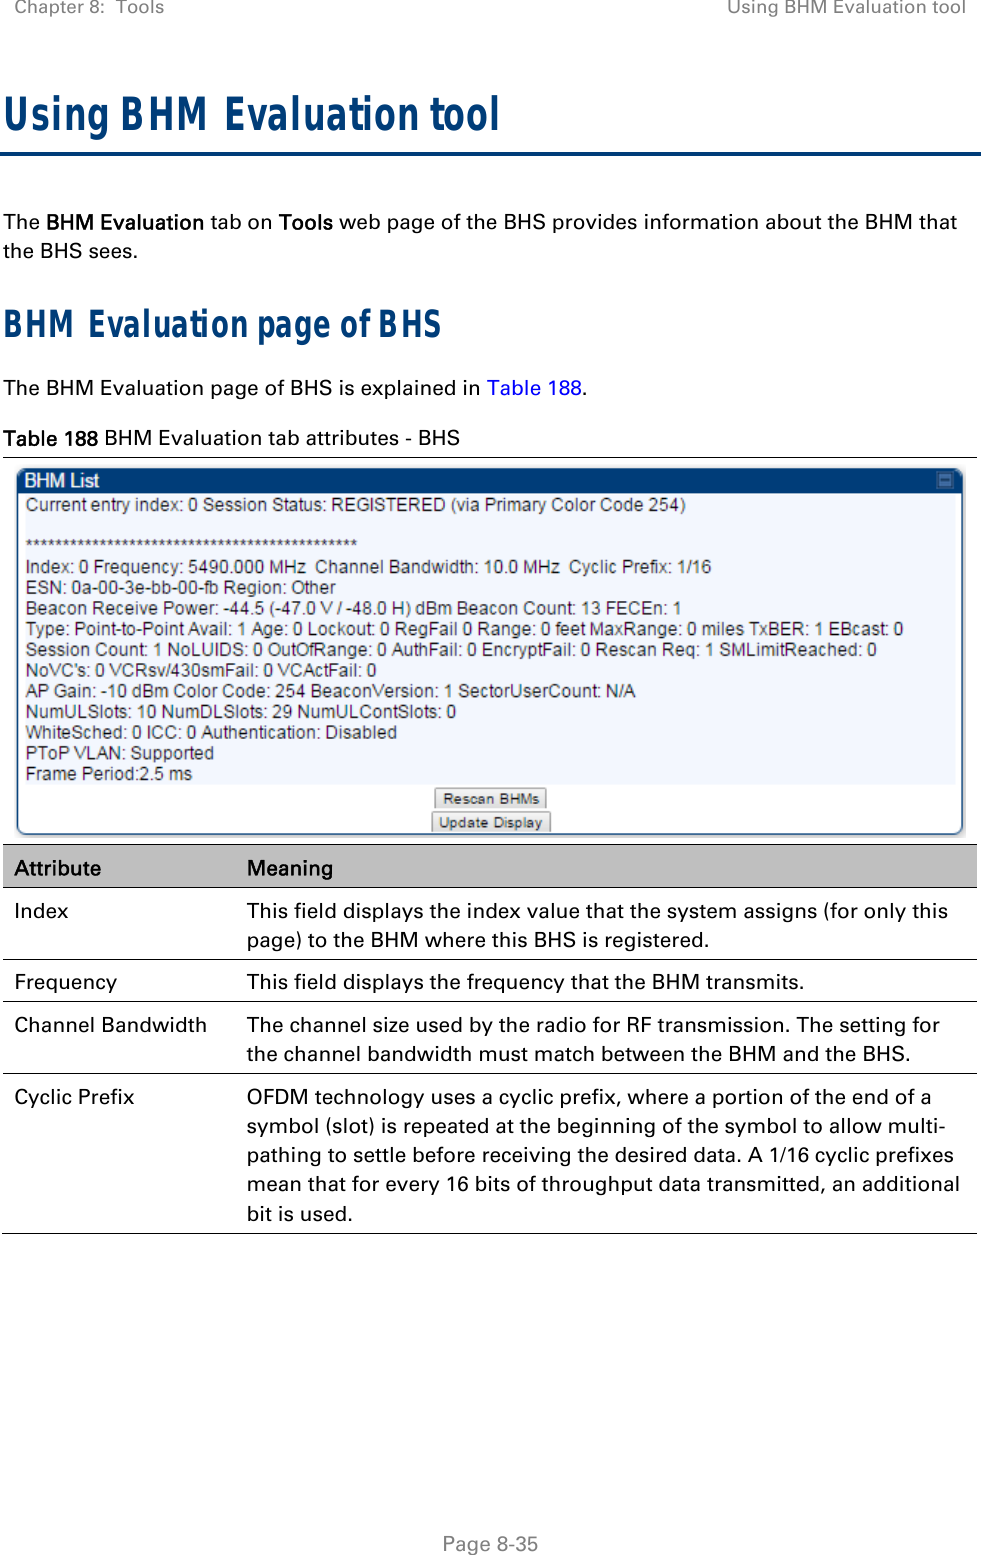 Chapter 8:  Tools  Using BHM Evaluation tool   Page 8-35 Using BHM Evaluation tool The BHM Evaluation tab on Tools web page of the BHS provides information about the BHM that the BHS sees. BHM Evaluation page of BHS The BHM Evaluation page of BHS is explained in Table 188. Table 188 BHM Evaluation tab attributes - BHS  Attribute  Meaning Index  This field displays the index value that the system assigns (for only this page) to the BHM where this BHS is registered. Frequency  This field displays the frequency that the BHM transmits. Channel Bandwidth  The channel size used by the radio for RF transmission. The setting for the channel bandwidth must match between the BHM and the BHS.  Cyclic Prefix  OFDM technology uses a cyclic prefix, where a portion of the end of a symbol (slot) is repeated at the beginning of the symbol to allow multi-pathing to settle before receiving the desired data. A 1/16 cyclic prefixes mean that for every 16 bits of throughput data transmitted, an additional bit is used. 